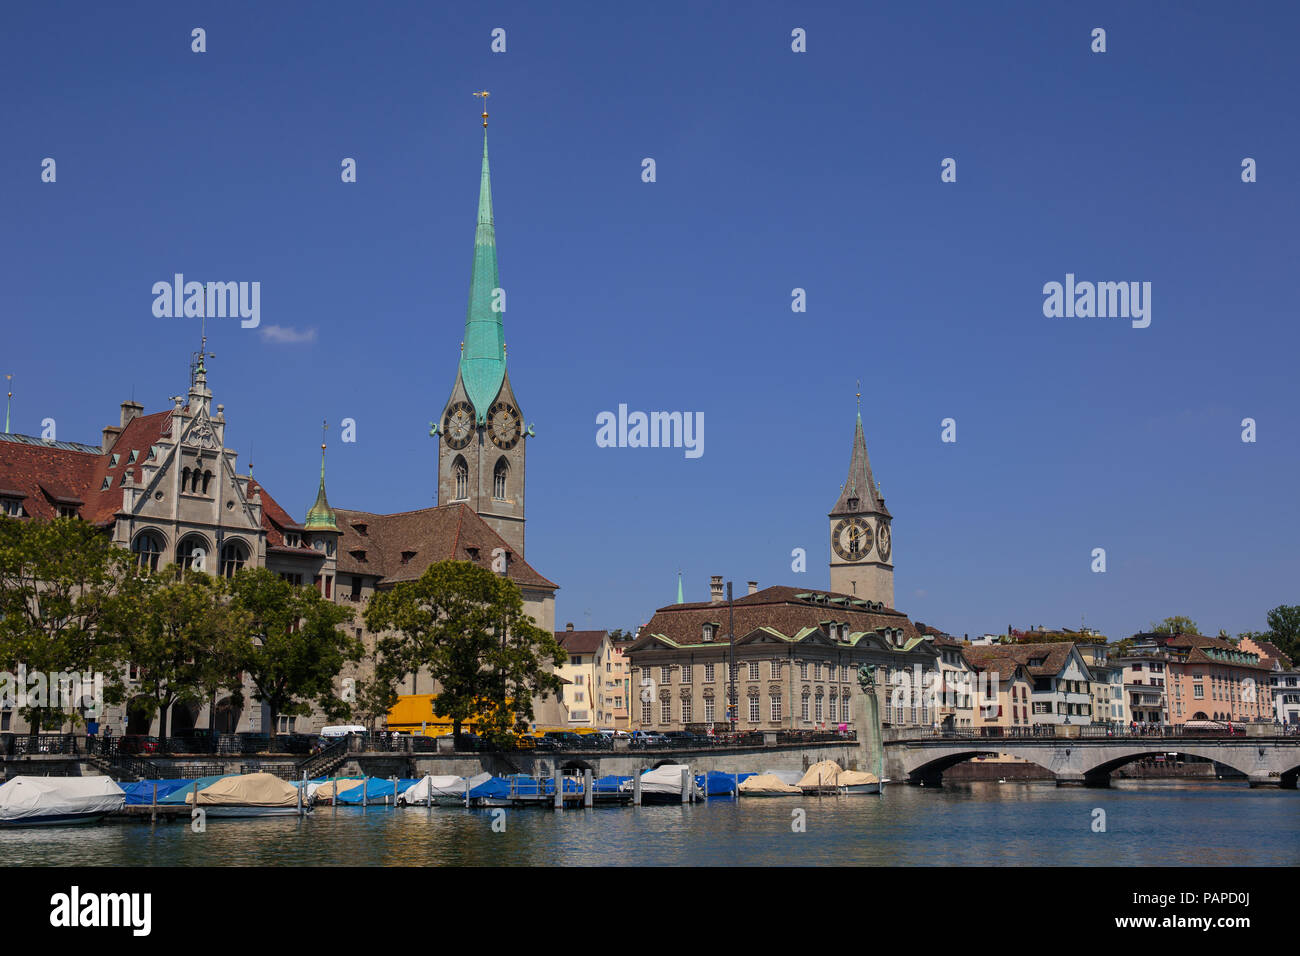 Famous view of various houses and churches in the old town part of Zurich. Zurich is the biggest city in Switzerland. Stock Photo